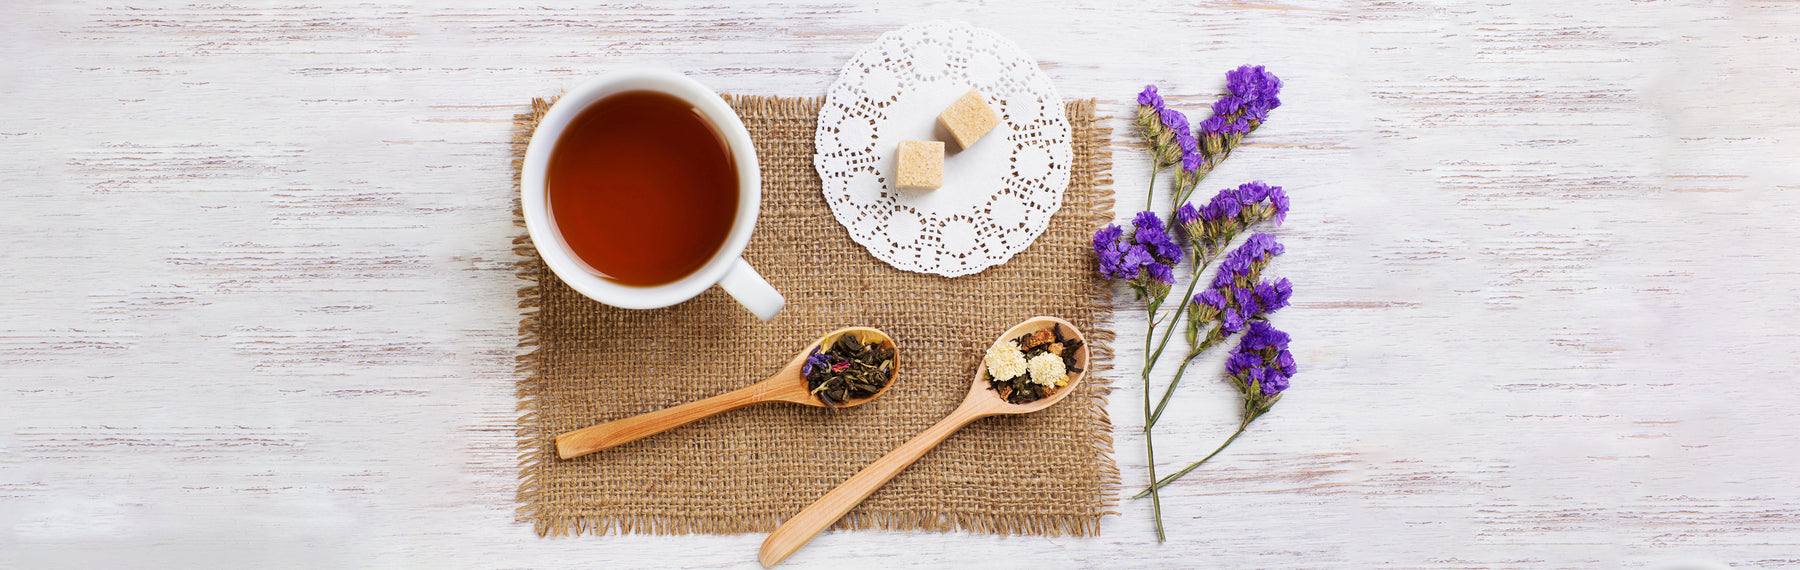 All You Need to Know About Herbal Teas - Sorichorganics